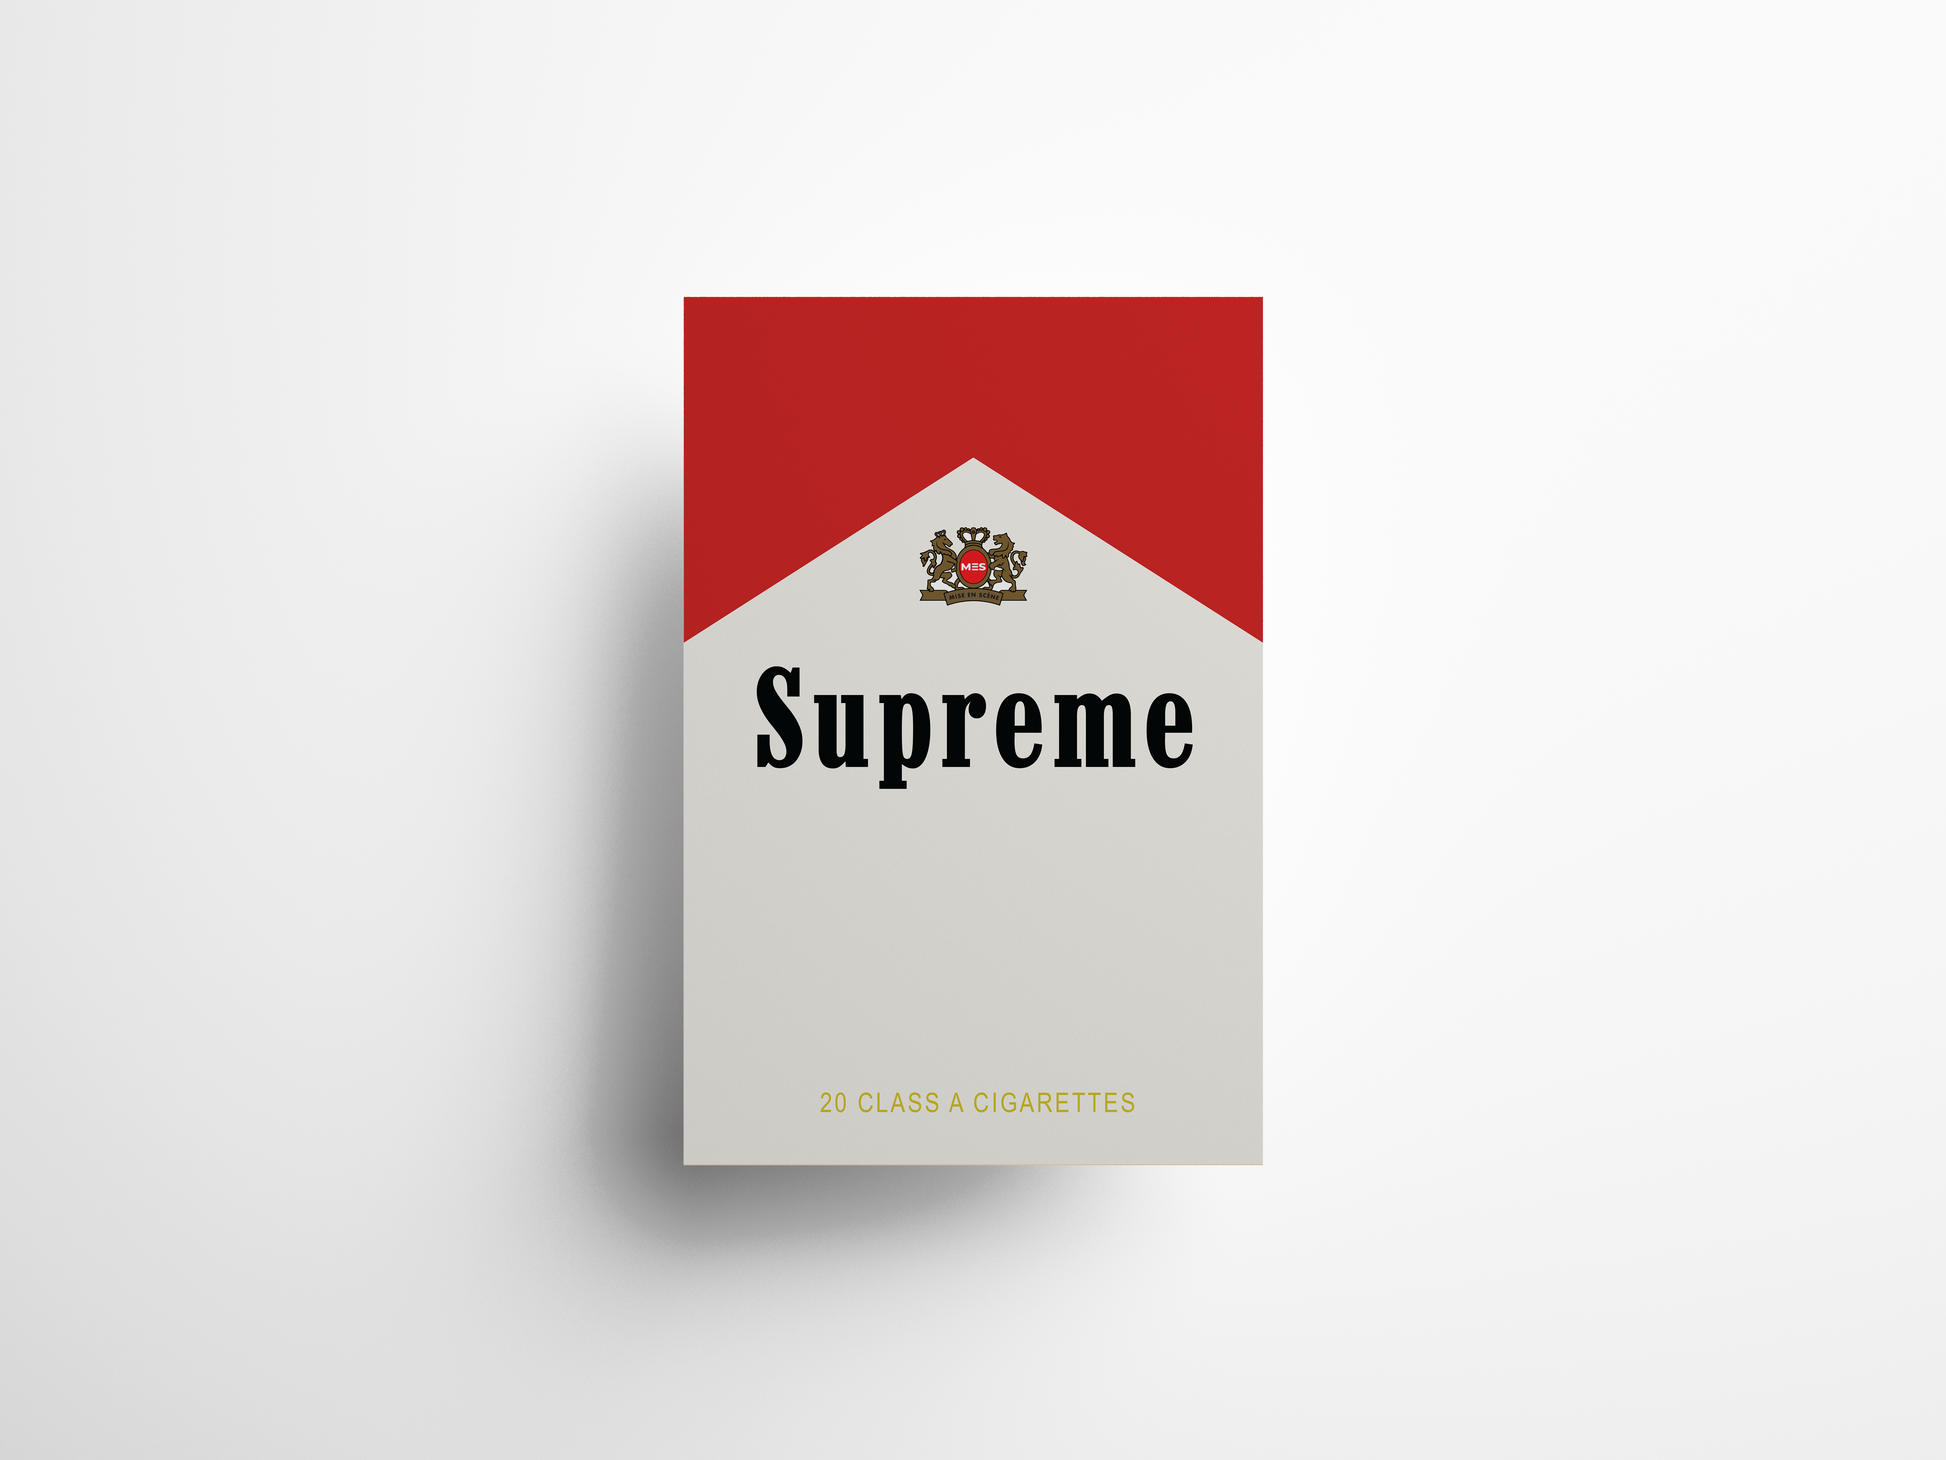 Premium & Sustainable Supreme Marlboro Poster Print. Hand crafted in the UK from the highest quality paper, created with sustainable FSC paper. Texturised inks, brings the poster to life. Available to purchase with a Polcore Recycled Plastic Frame with Perspex screening to let your print do the talking. Global shipping